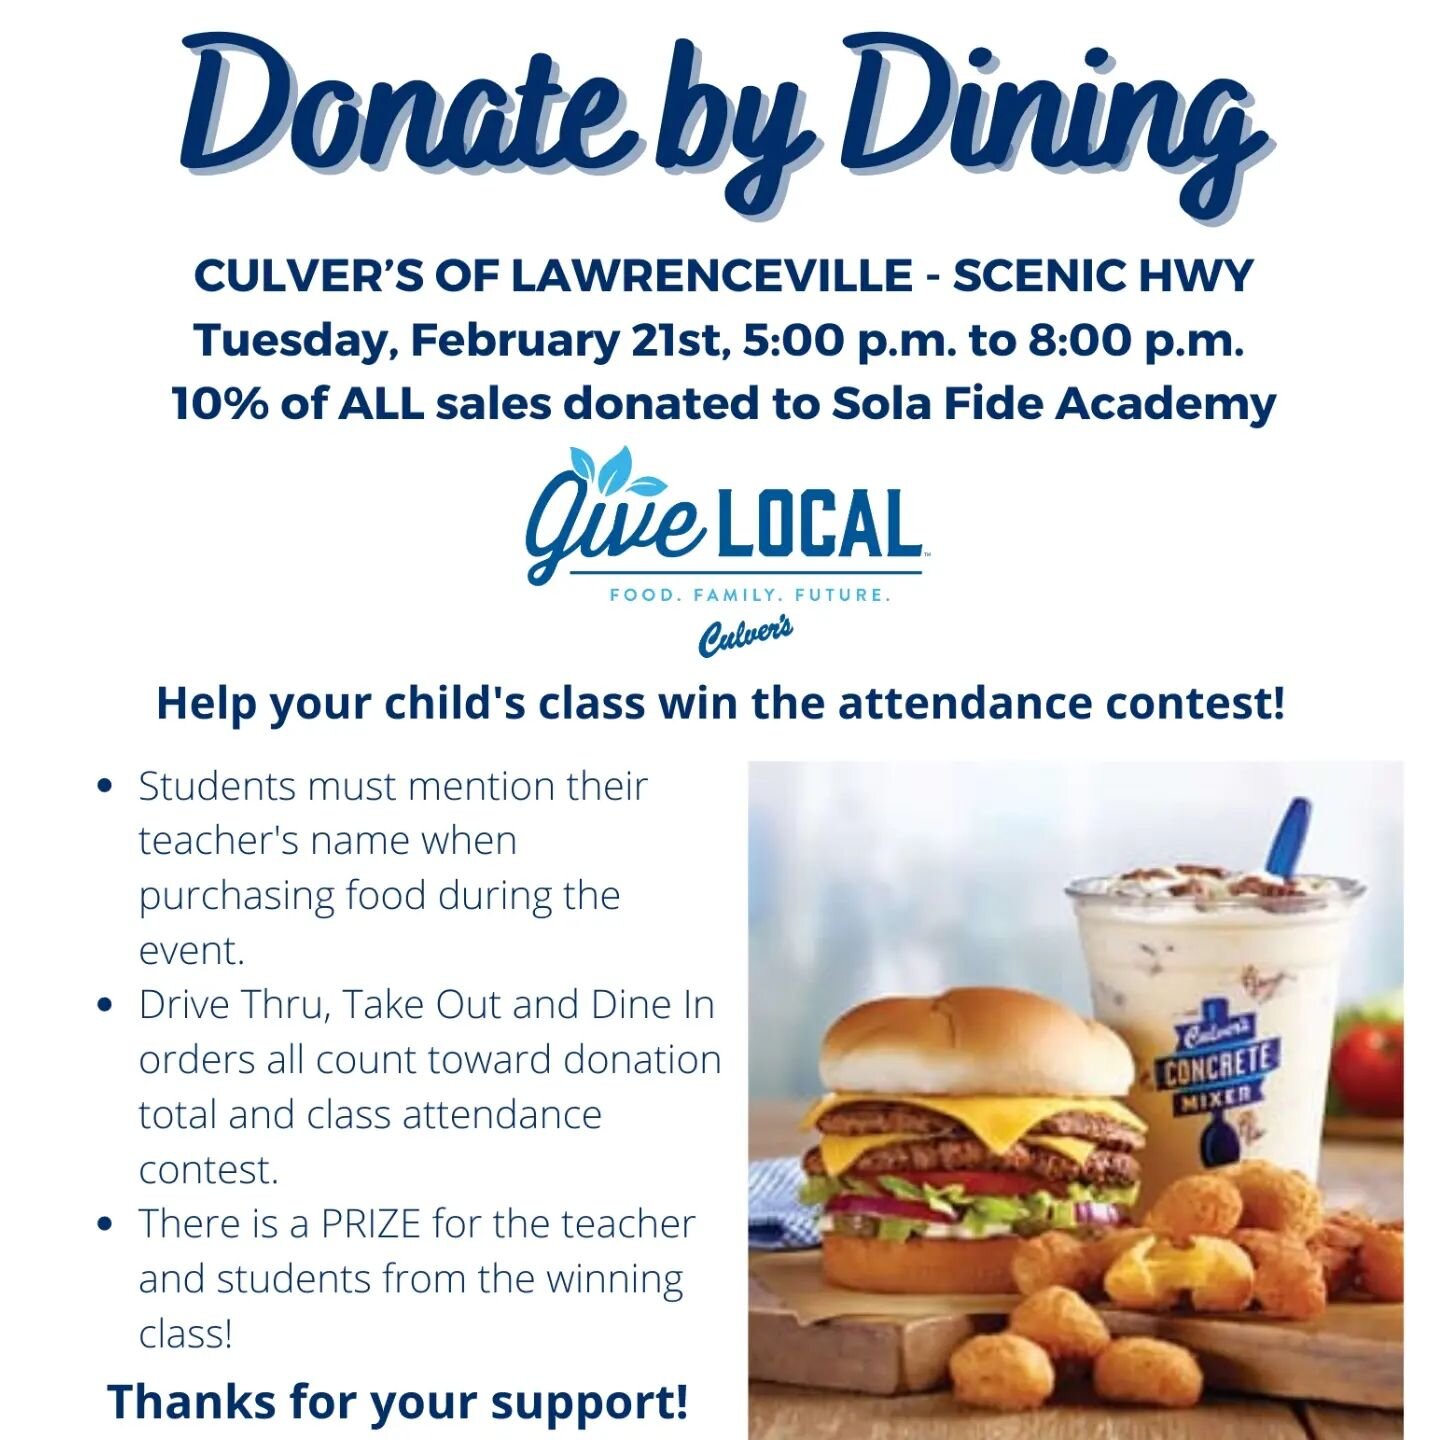 Take a break from making dinner and support Sola Fide Academy!
On Tuesday, February 21, from 5-8 pm, the Culver's in Lawrenceville will donate 10% of their sales to Sola Fide Academy.
Don't forget to mention the name of your teacher when you order! T